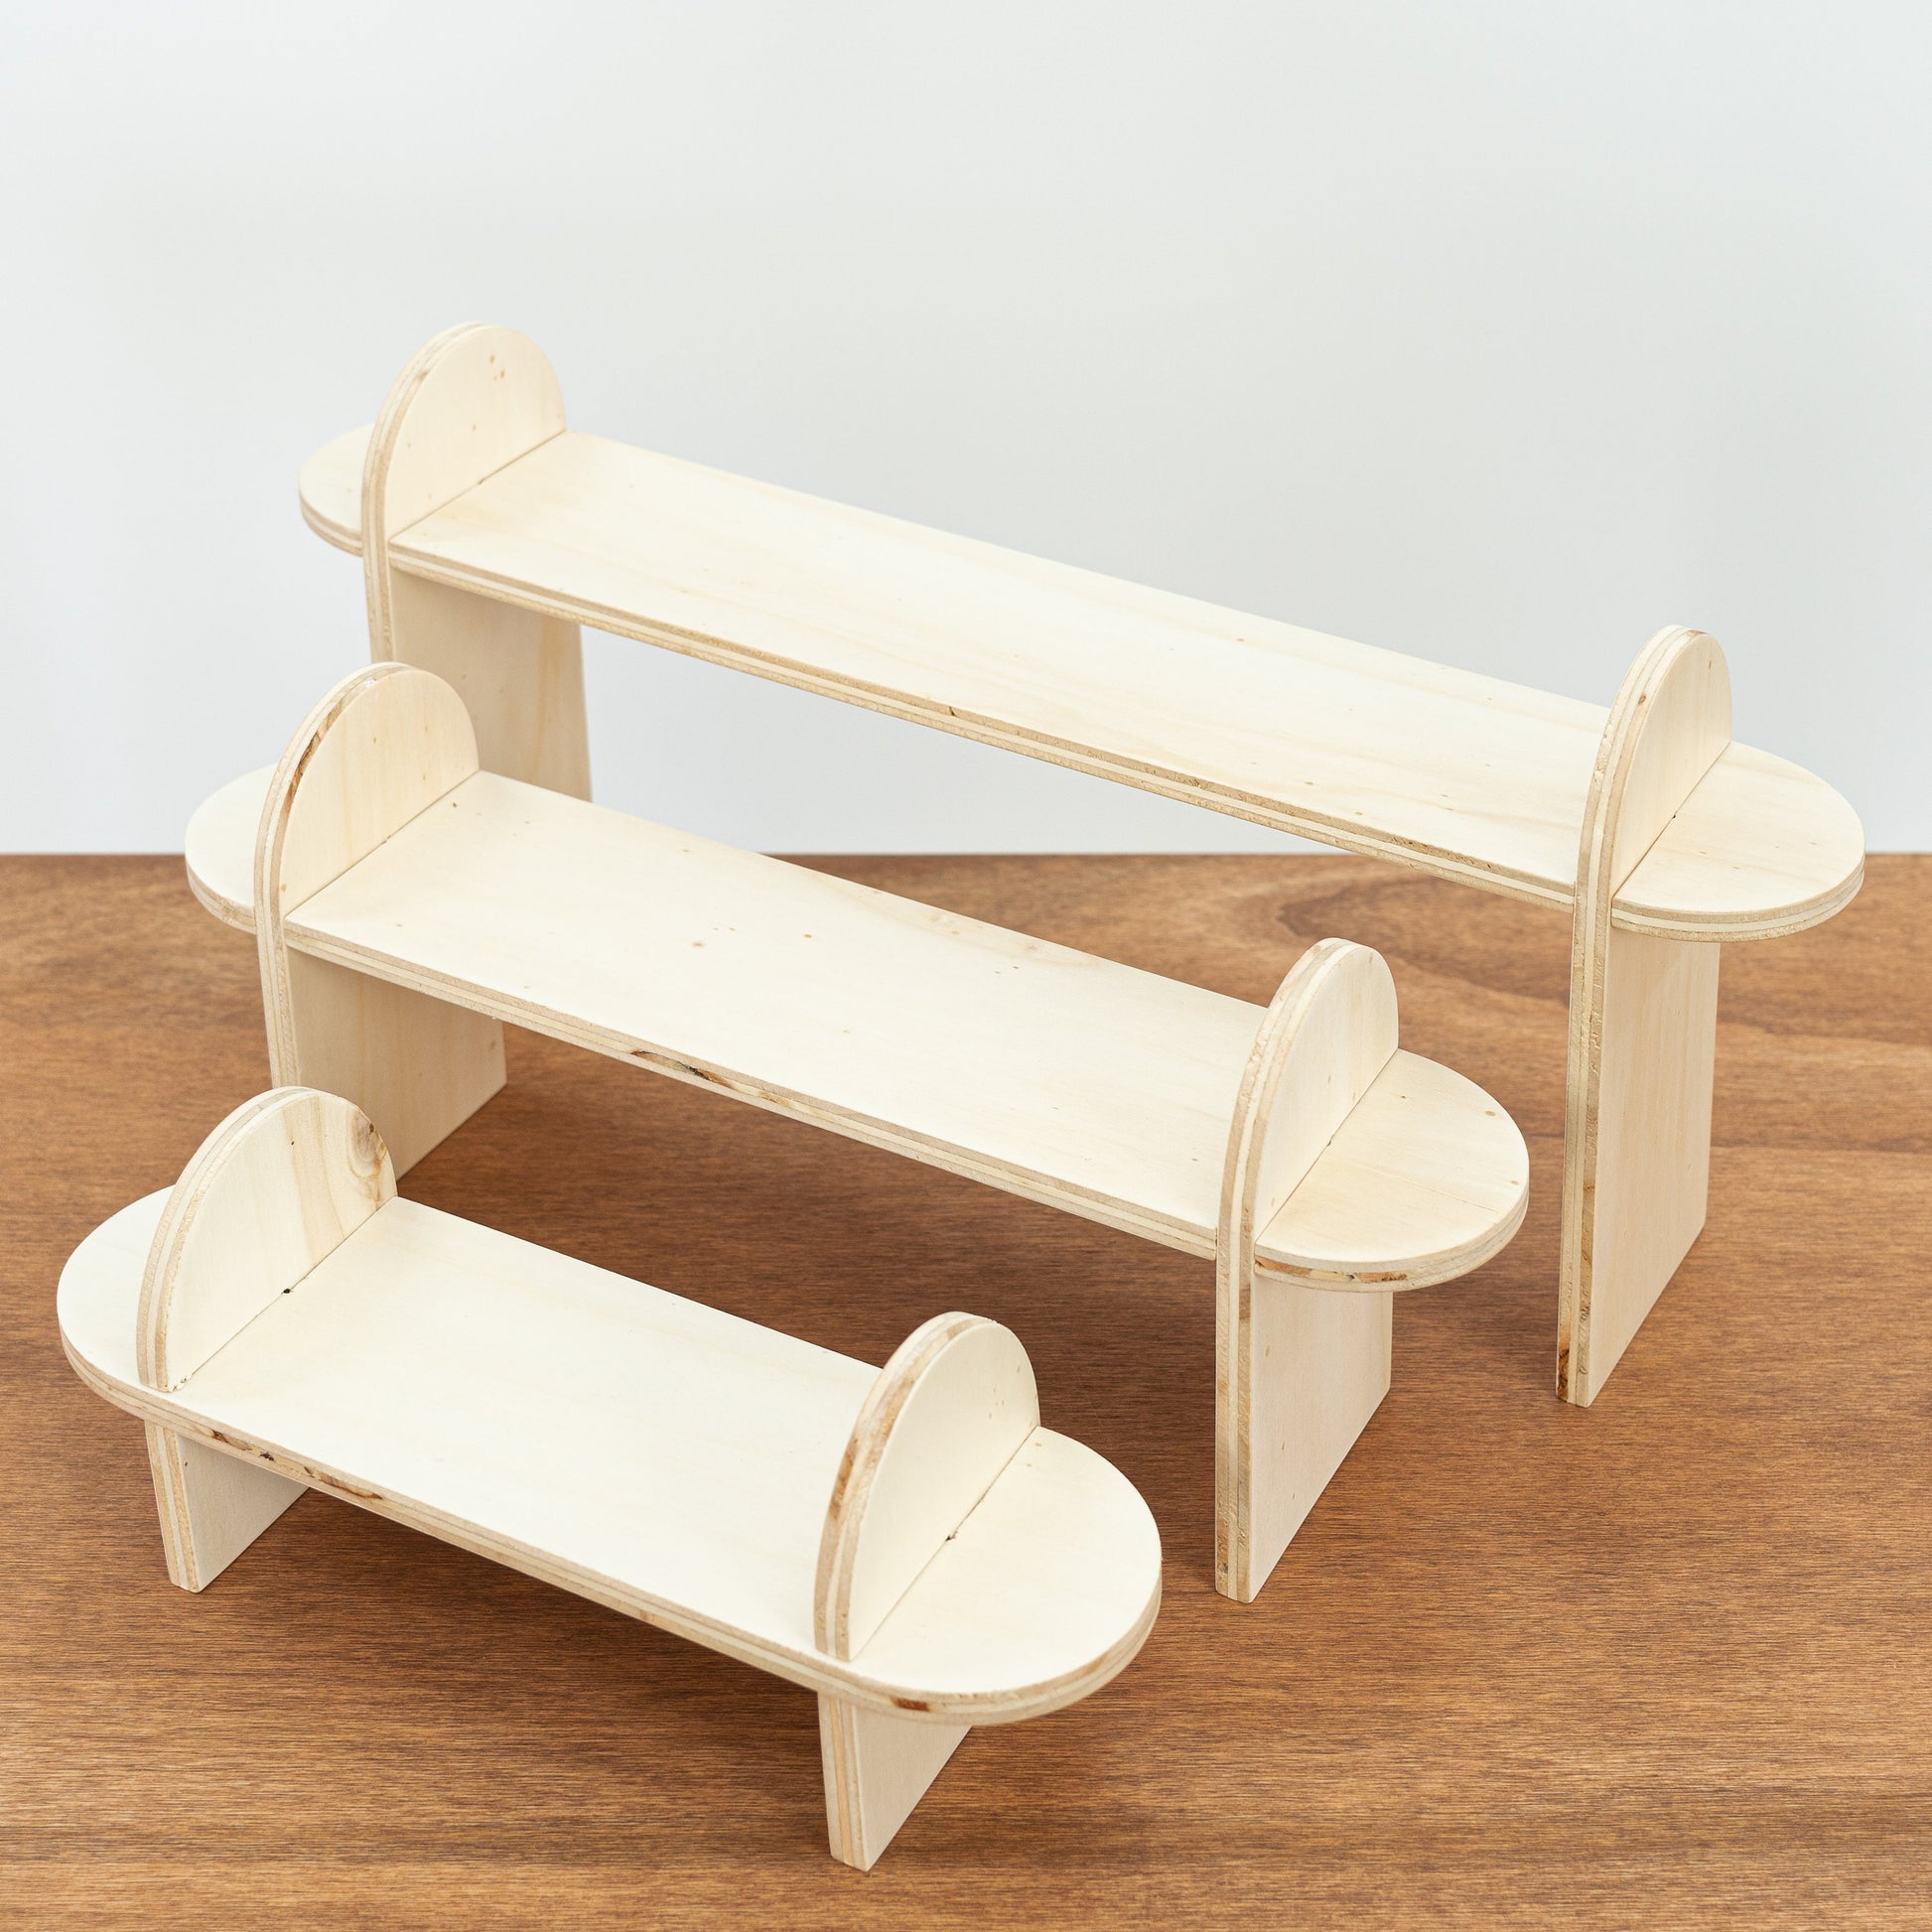 Set of 3 product risers, 3-tired tabletop plywood display stand VAR-05-NT